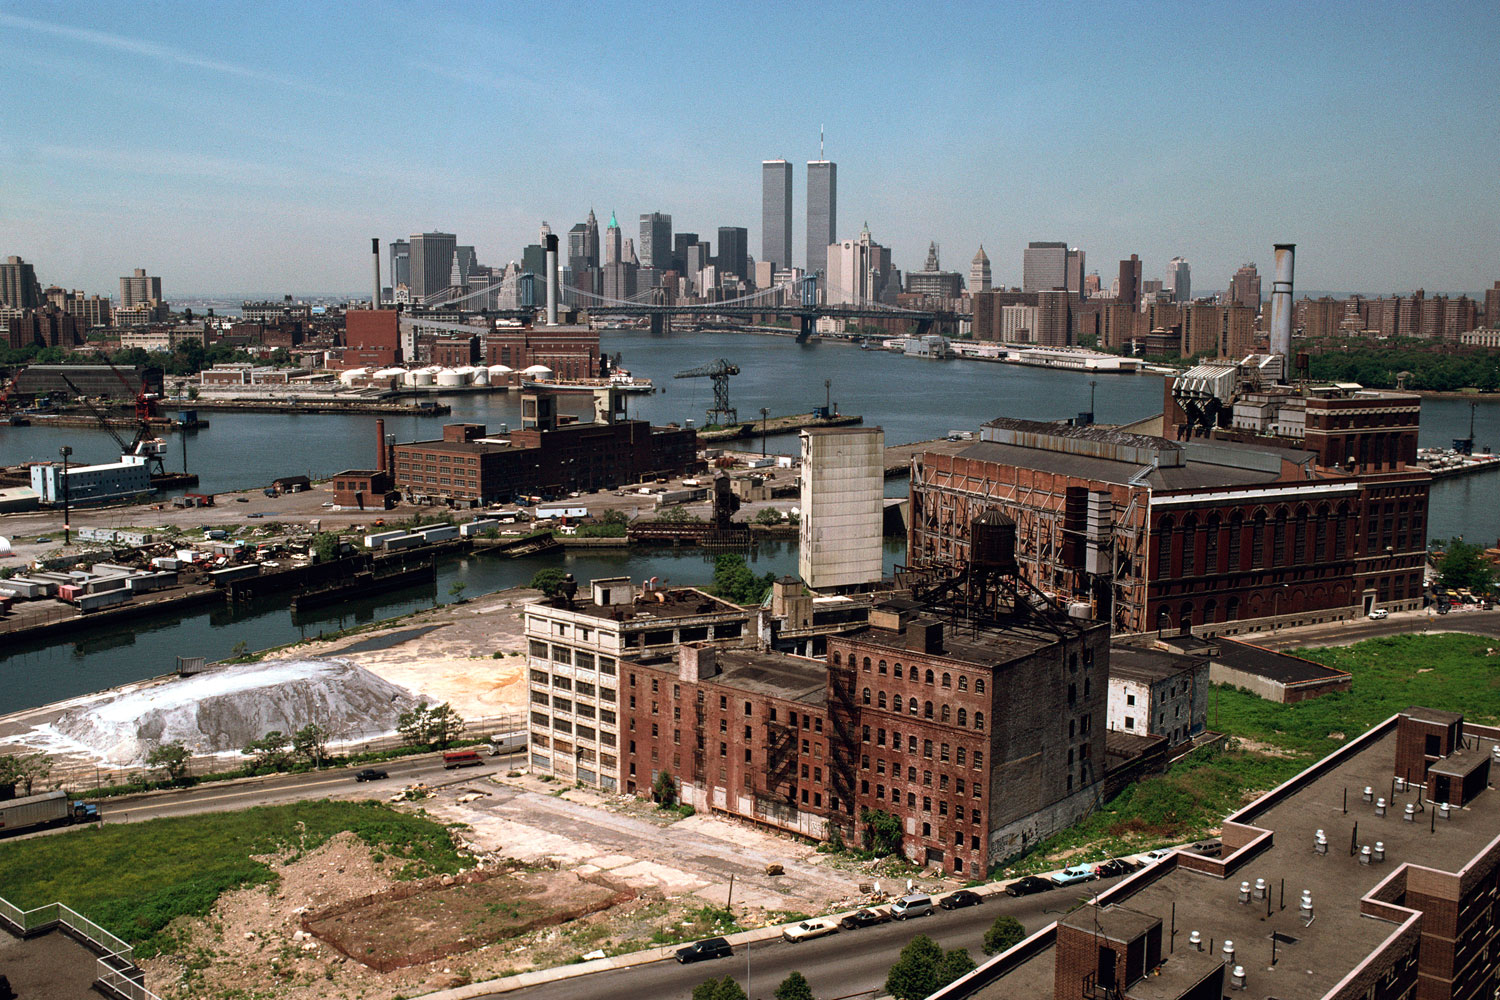 Southwest view from Independence Houses, Taylor Street at Whyte Place, Brooklyn, 1990. The building in the foreground, once a brewery, has become a housing complex. The Wallabout Canal is center, with the Brooklyn Navy Yard on the left.